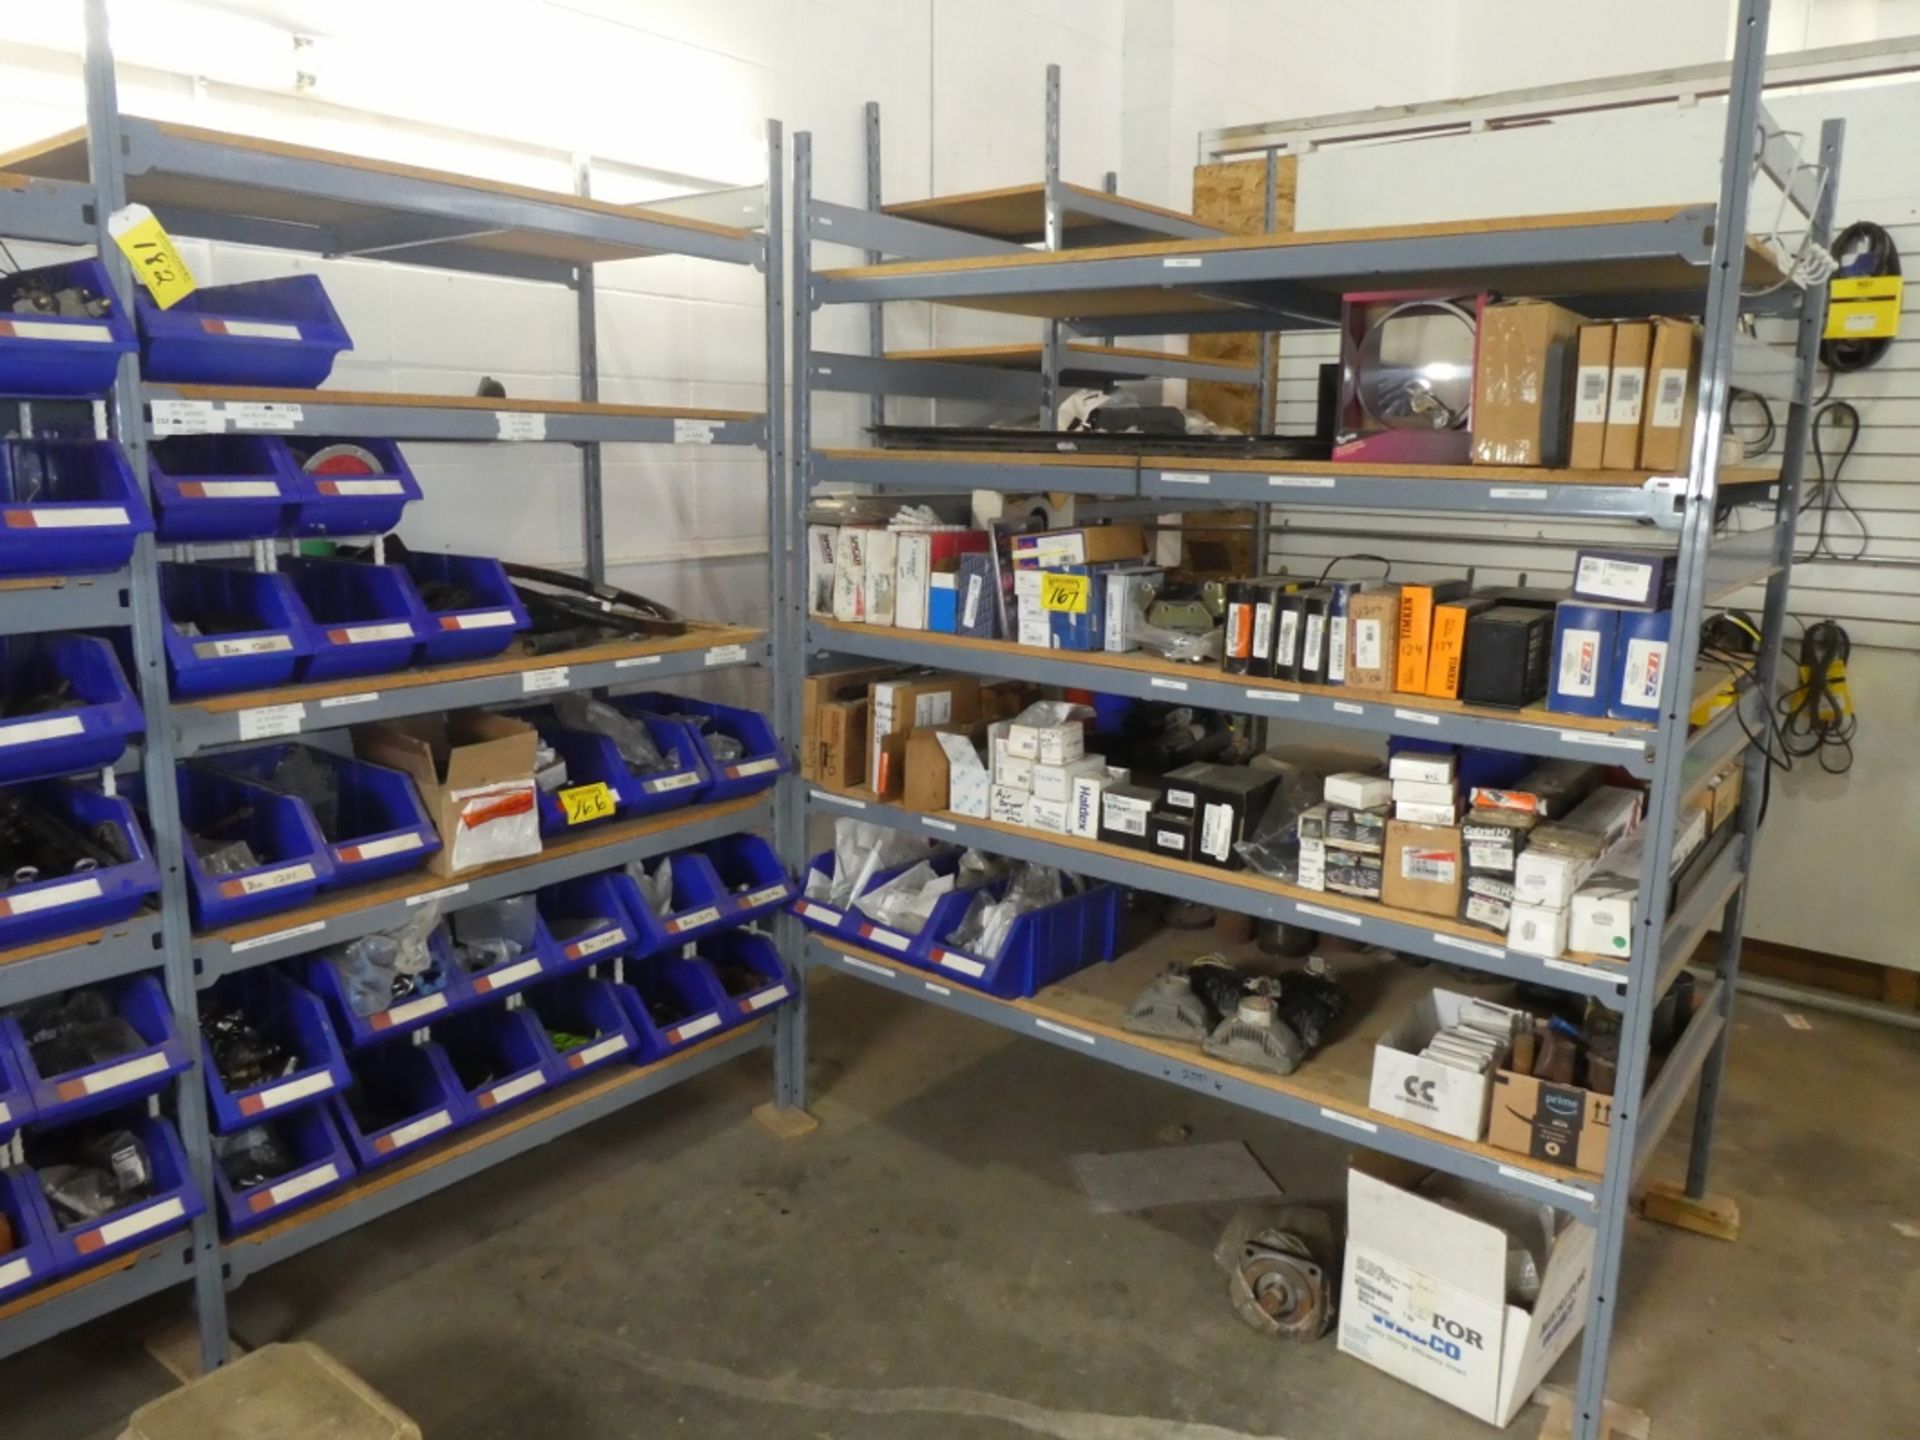 L/O EZEE RECT SHELVING IN PARTS INVENTORY ROOM 2- 4 FT SECTIONS, 1- 5 FT SECTION, 1-6 FT SECTION - Image 2 of 3